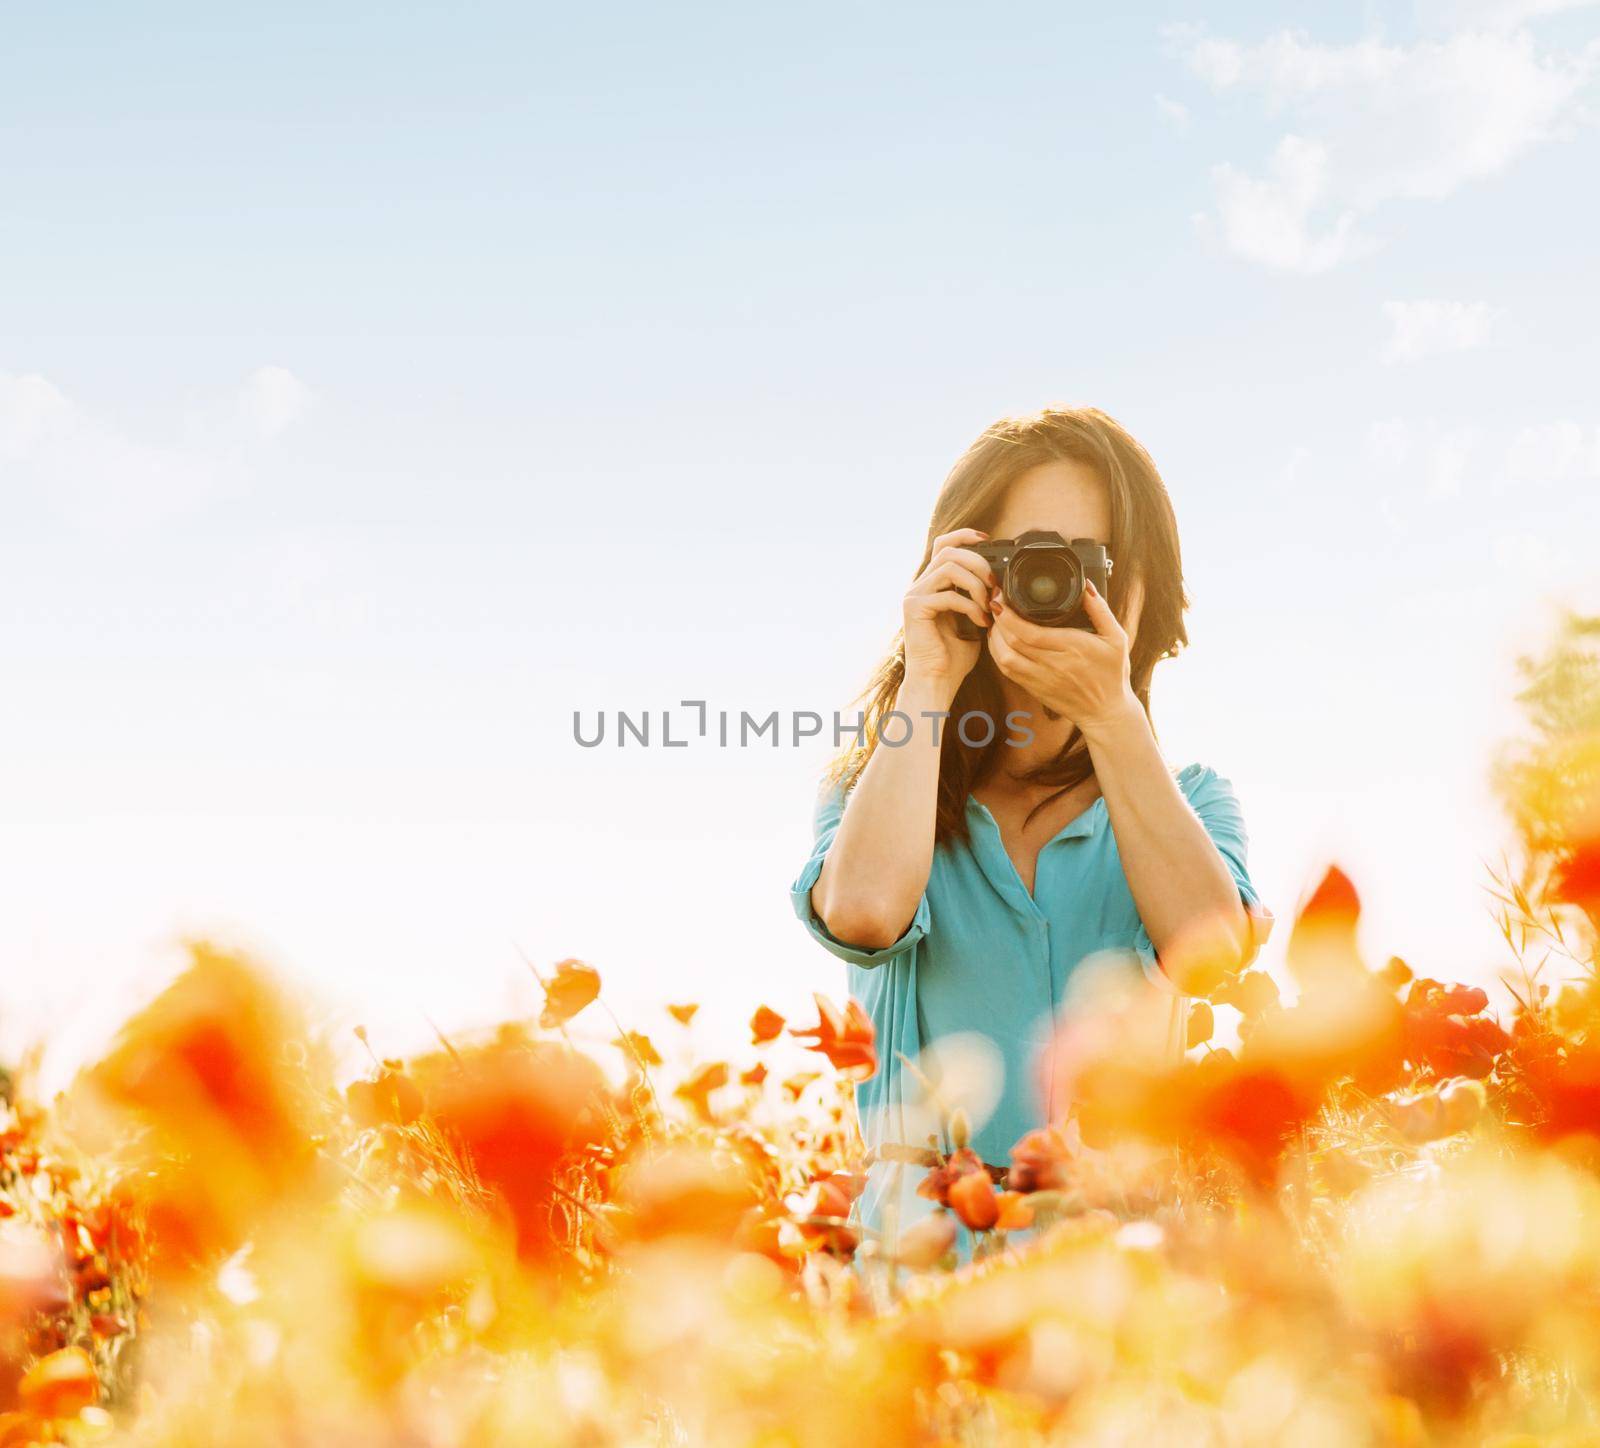 Girl photographing with a camera in flower meadow in summer outdoor.